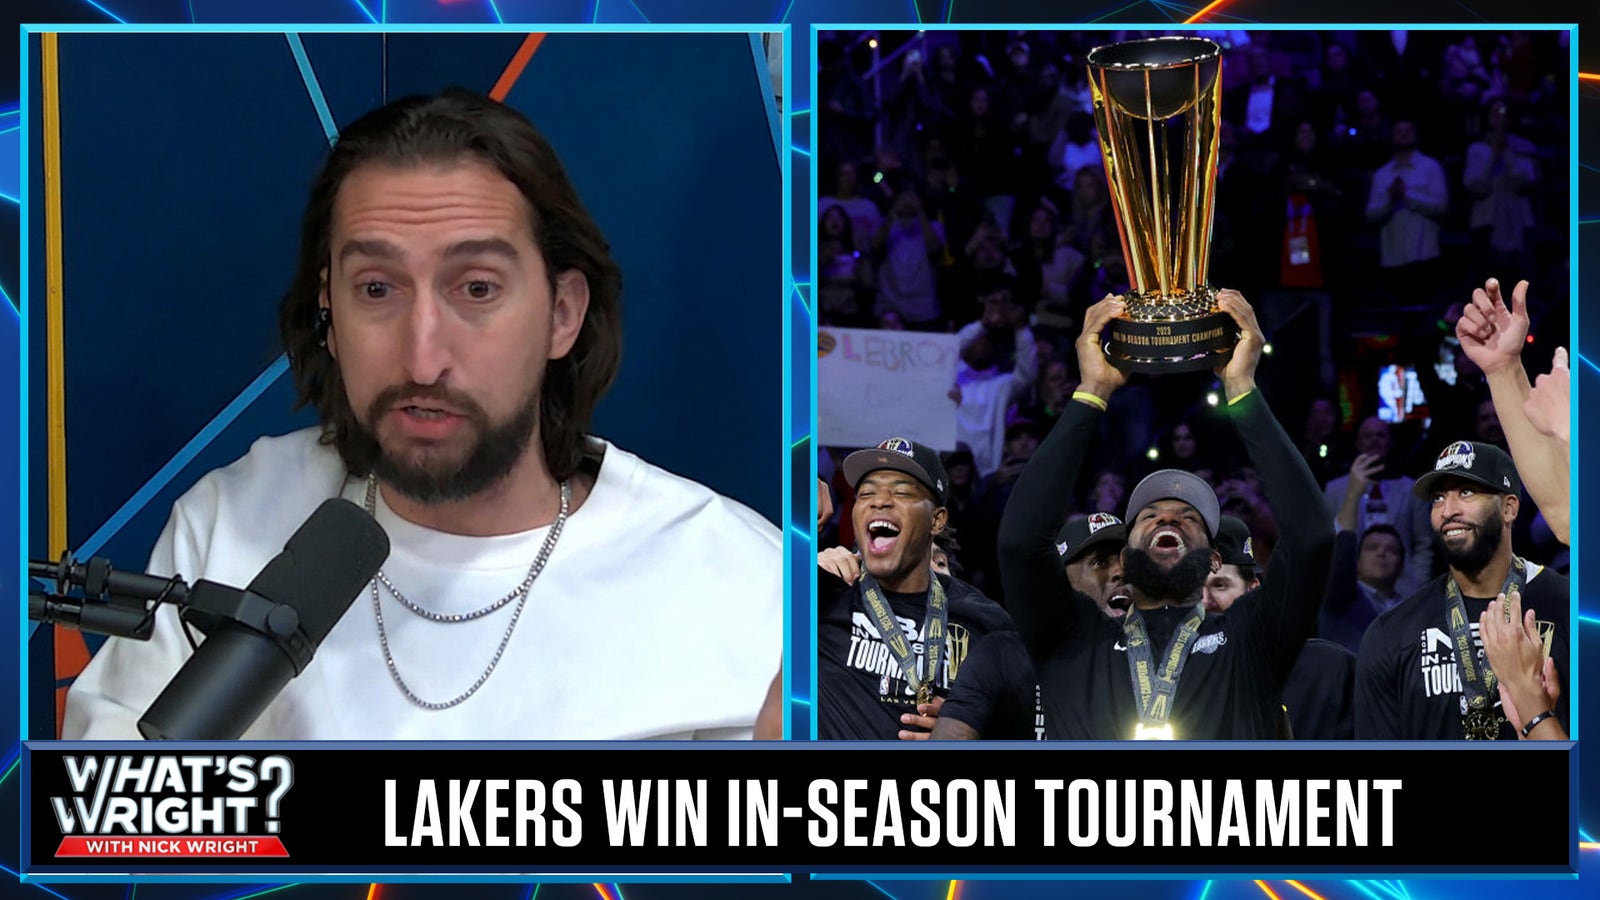 What does a Lakers In-Season Tournament title mean for LeBron and company?